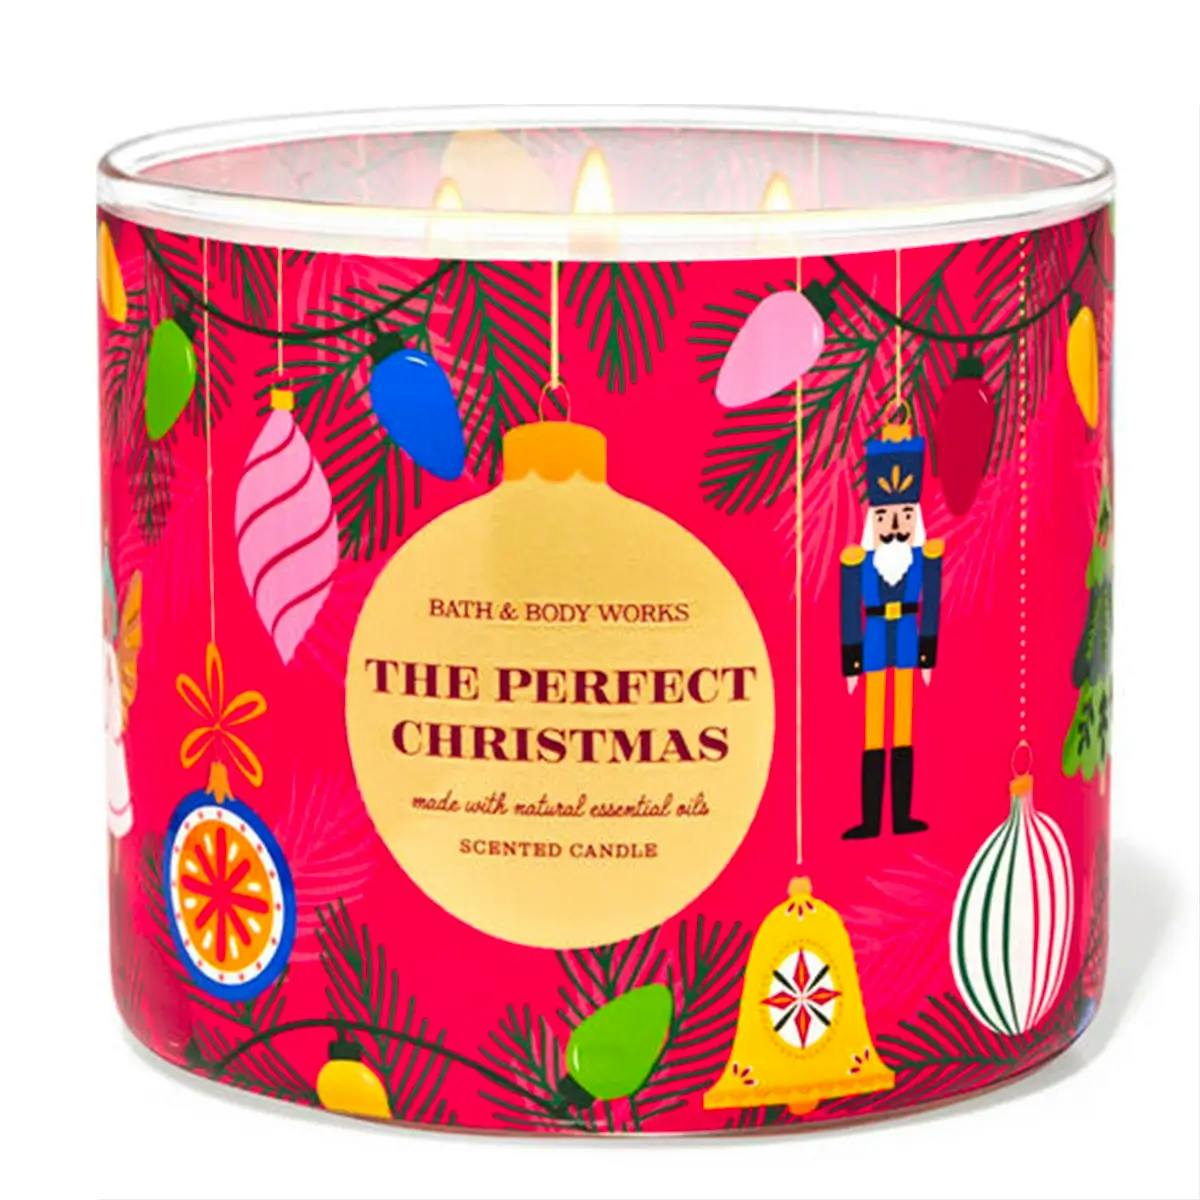 “The Perfect Christmas” candle by Bath and Bodyworks.